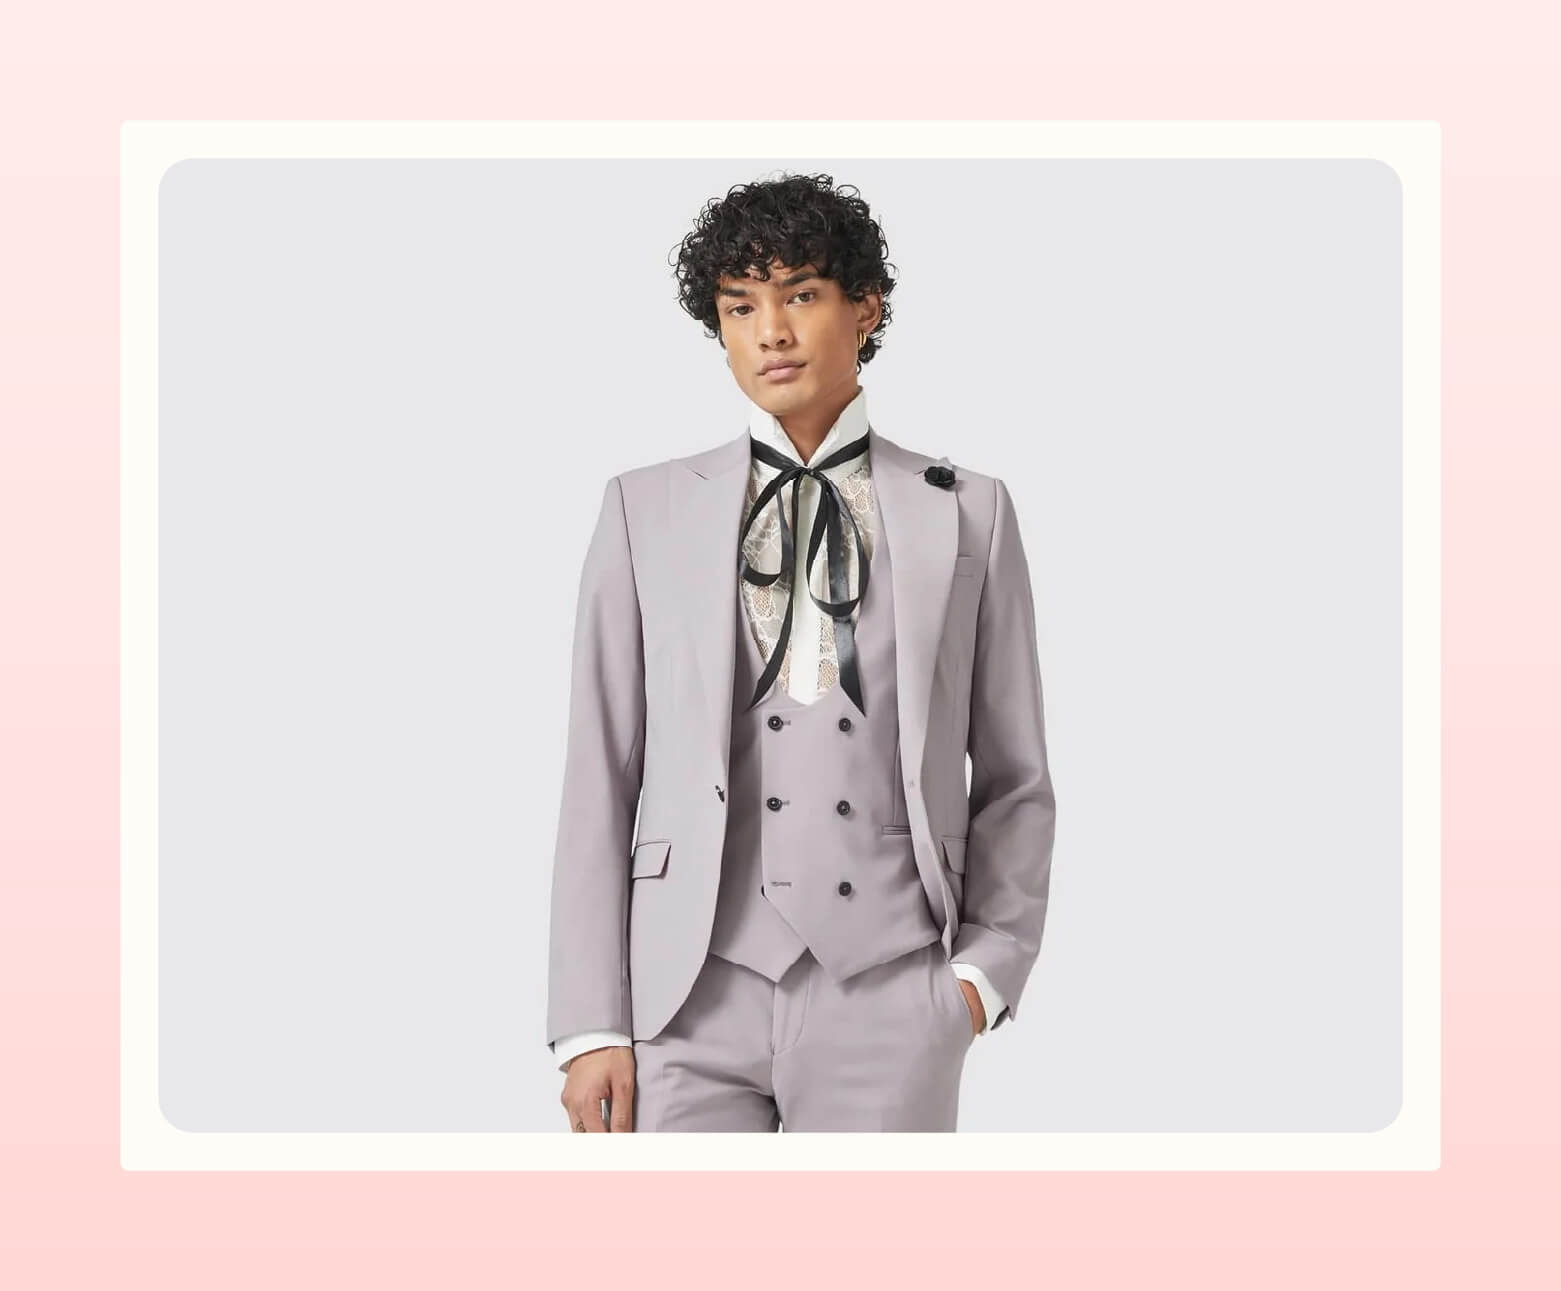 A person wearing a pale violet suit from Twisted Tailor with a vest, lace shirt, and ribbon bow around collar